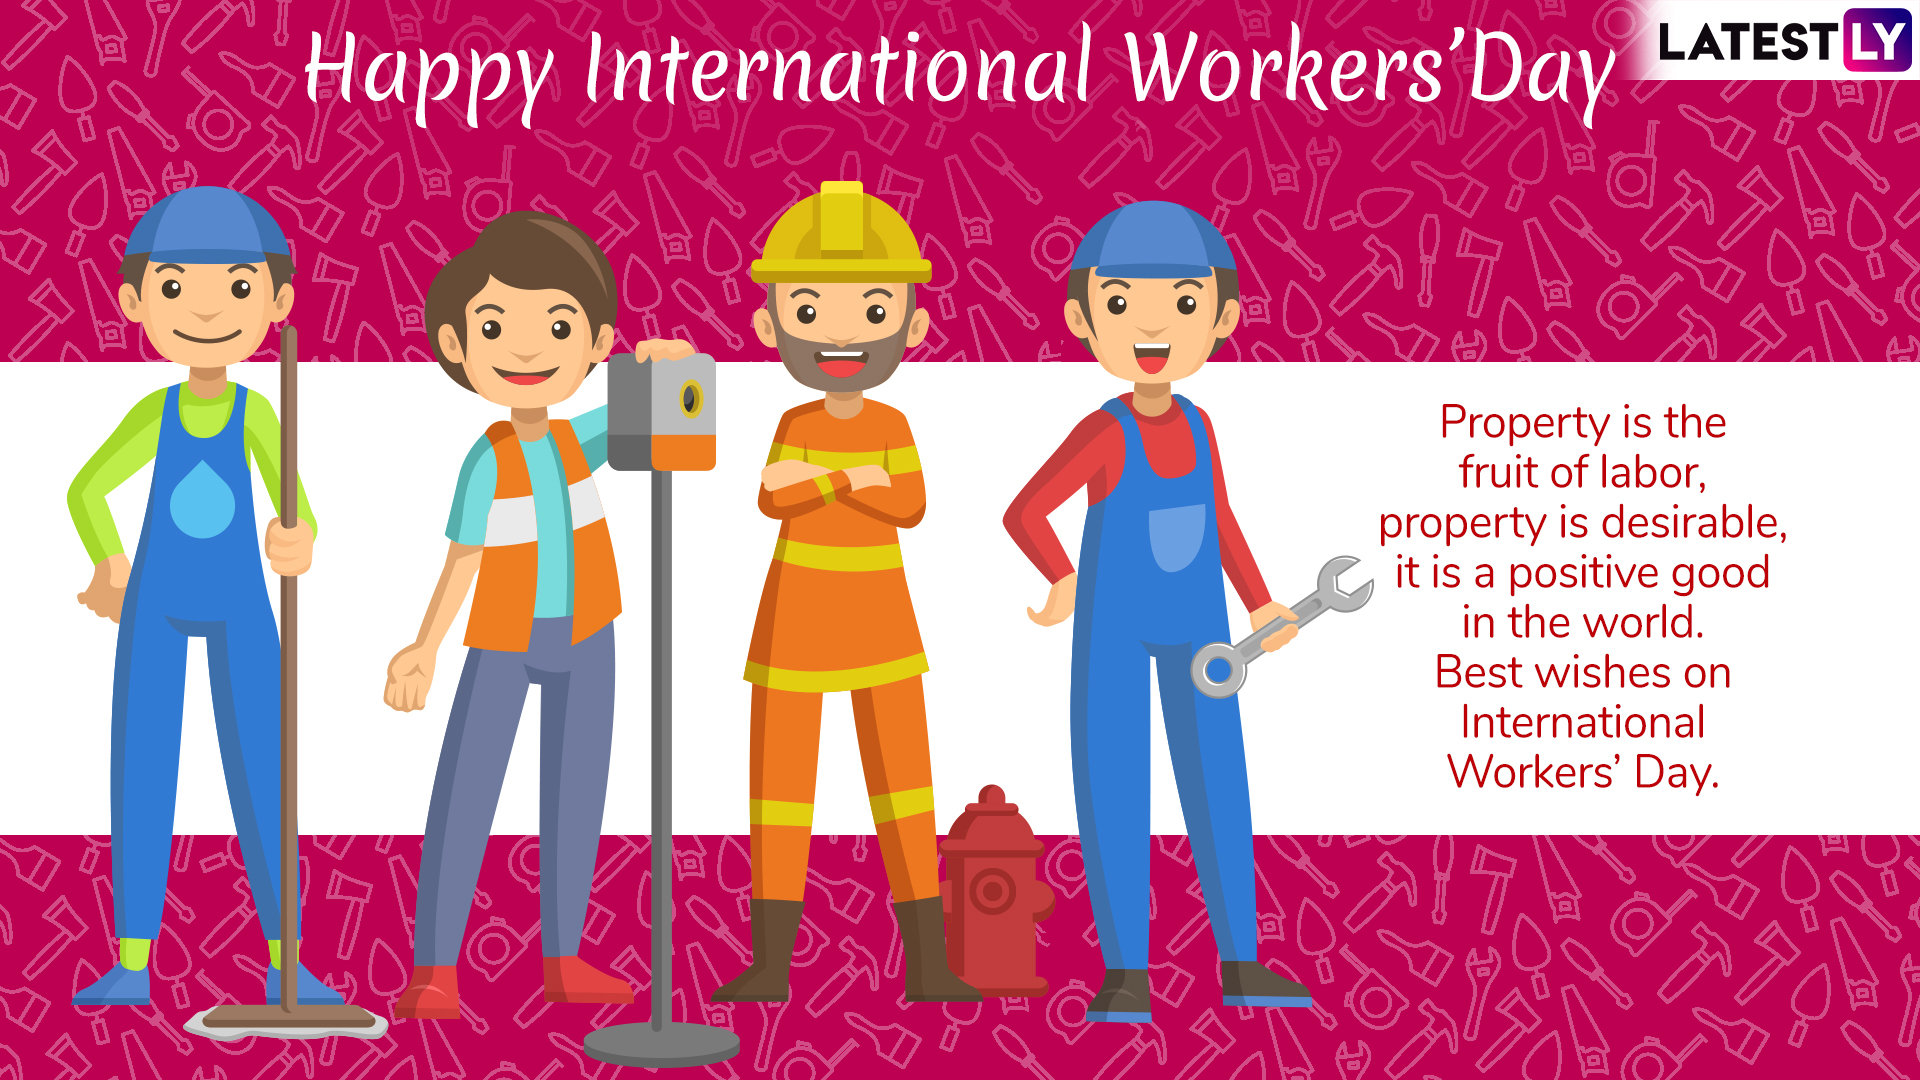 International-Workers-Day-Wishes-and-Messages-1.jpg